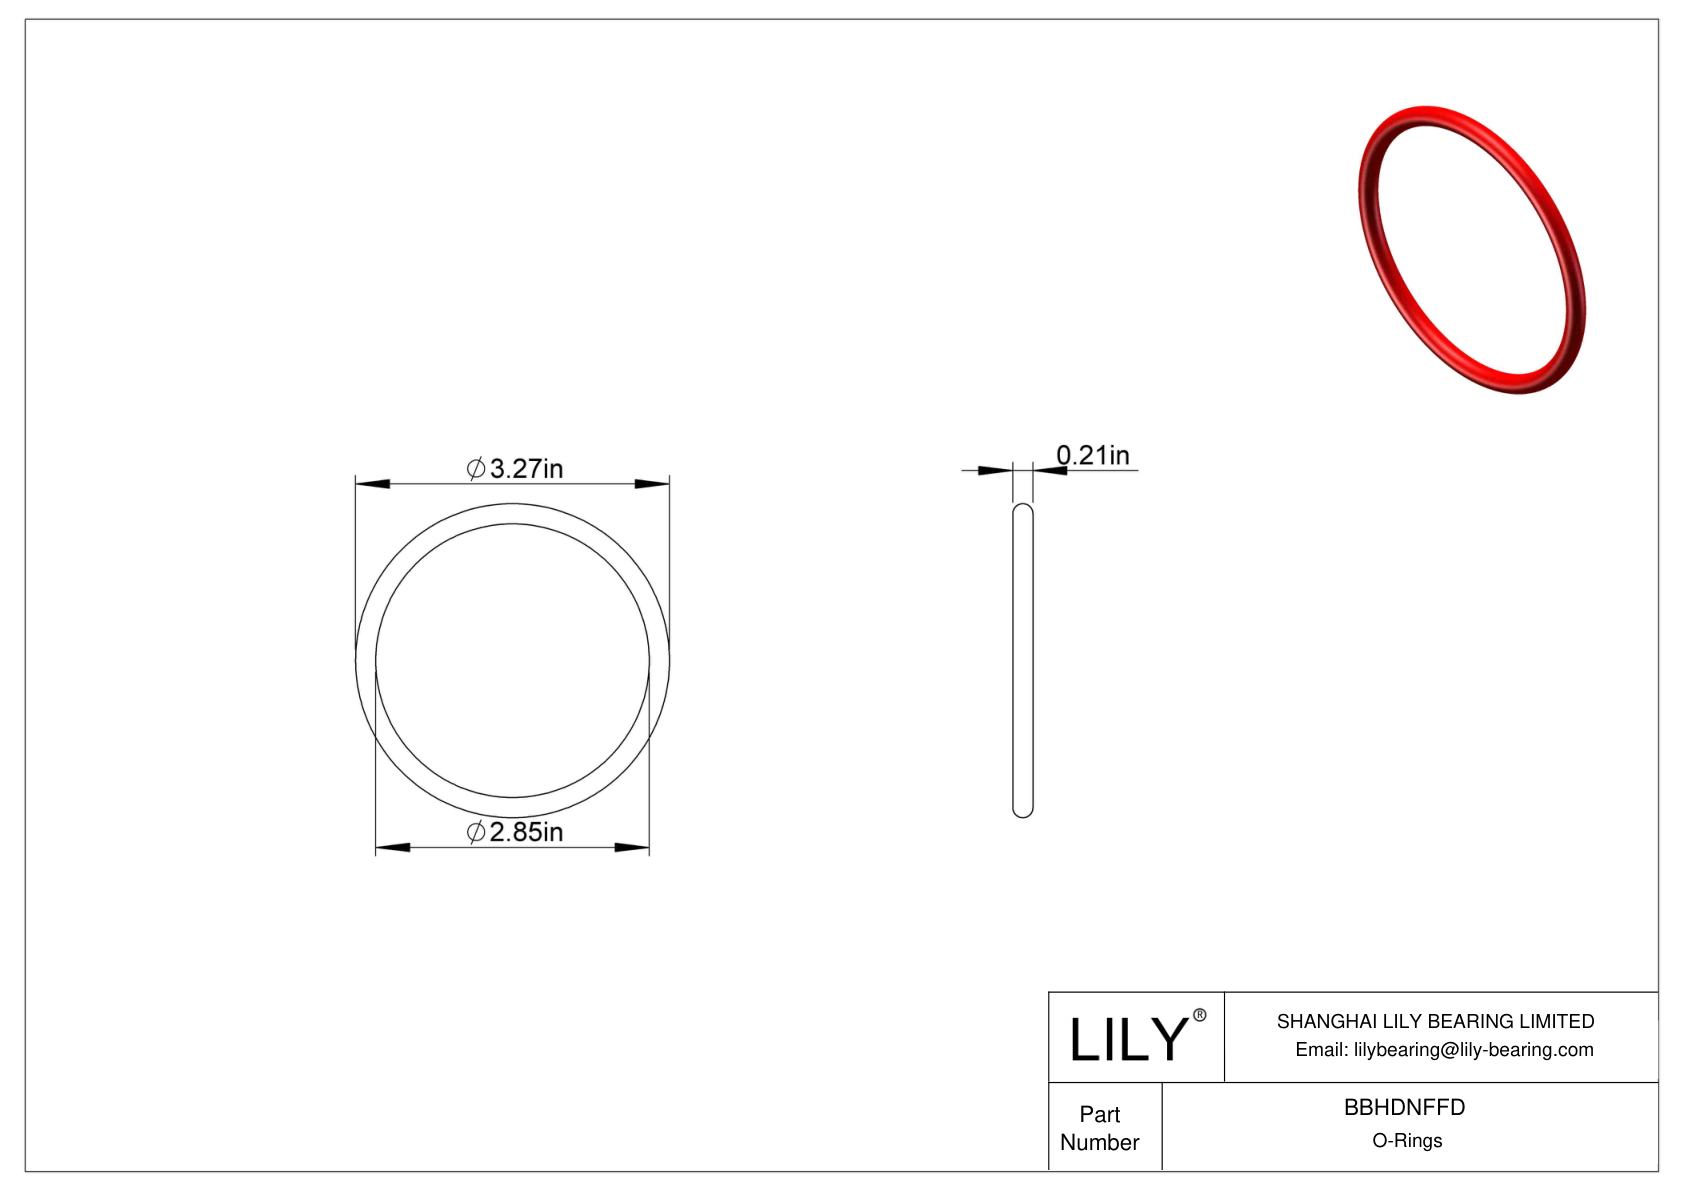 BBHDNFFD High Temperature O-Rings Round cad drawing